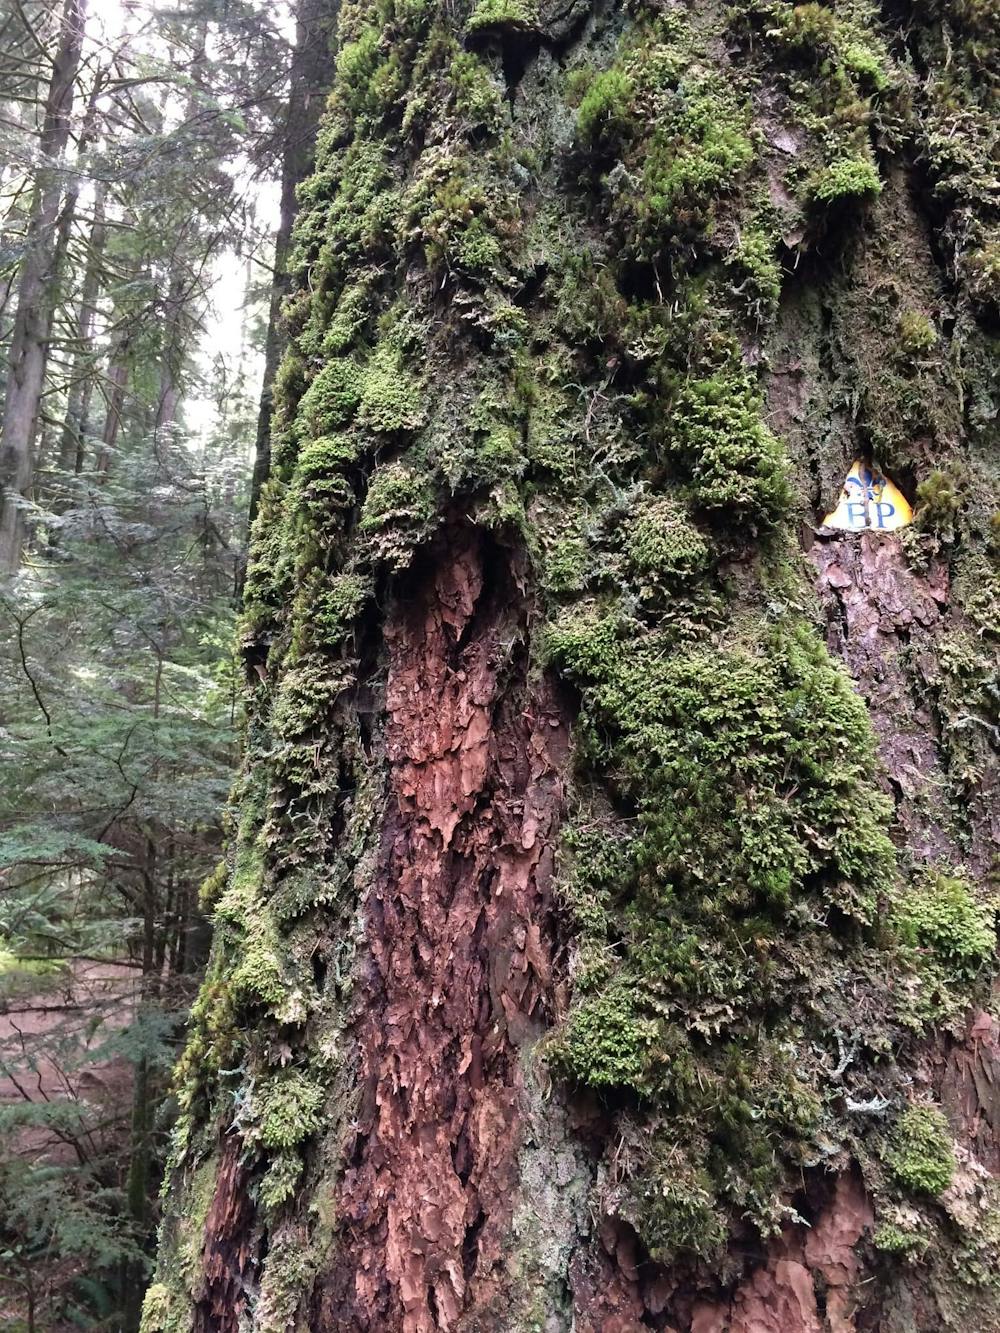 Baden Powell trail blaze on mature, moss covered tree